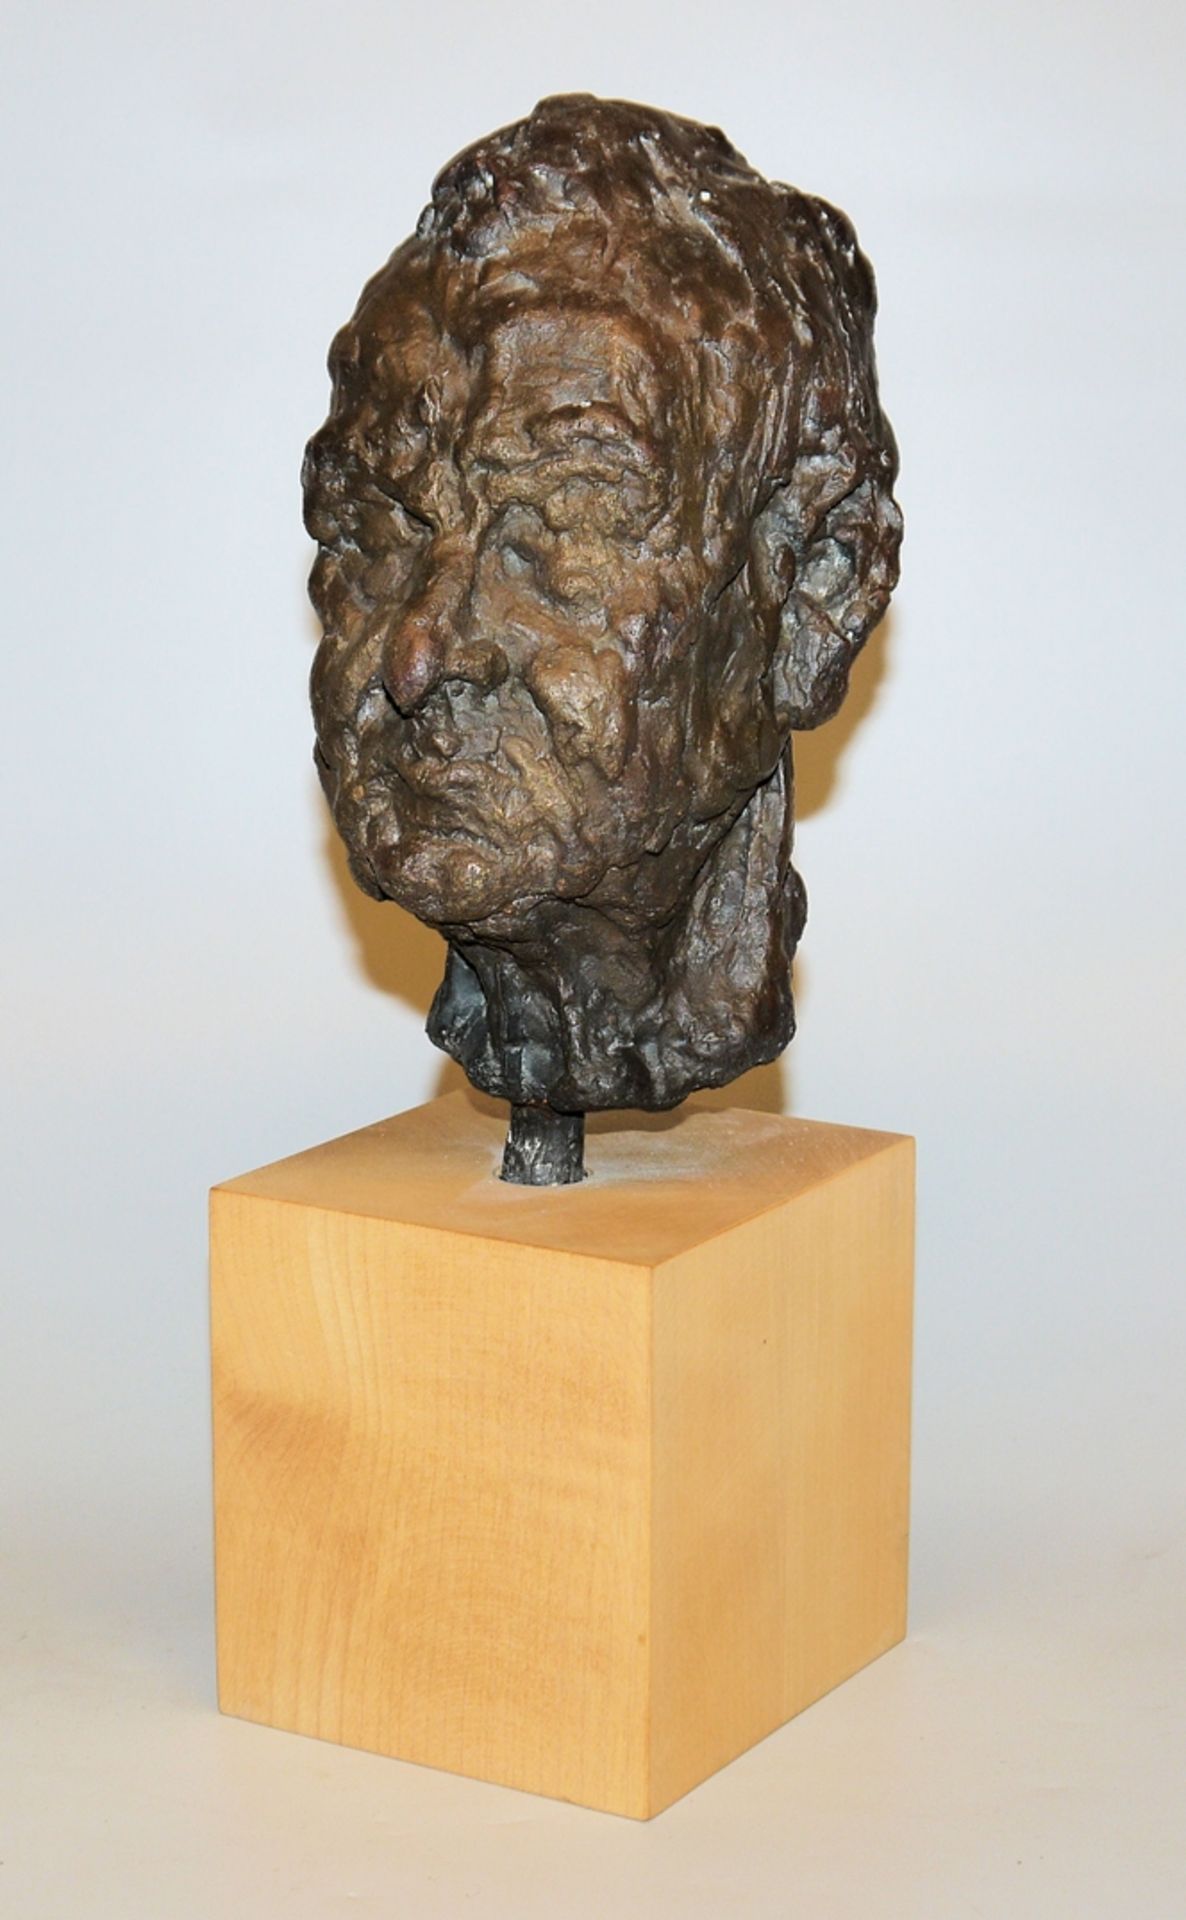 Attributed to Willem Verbon, Head of a striking personality, bronze sculpture